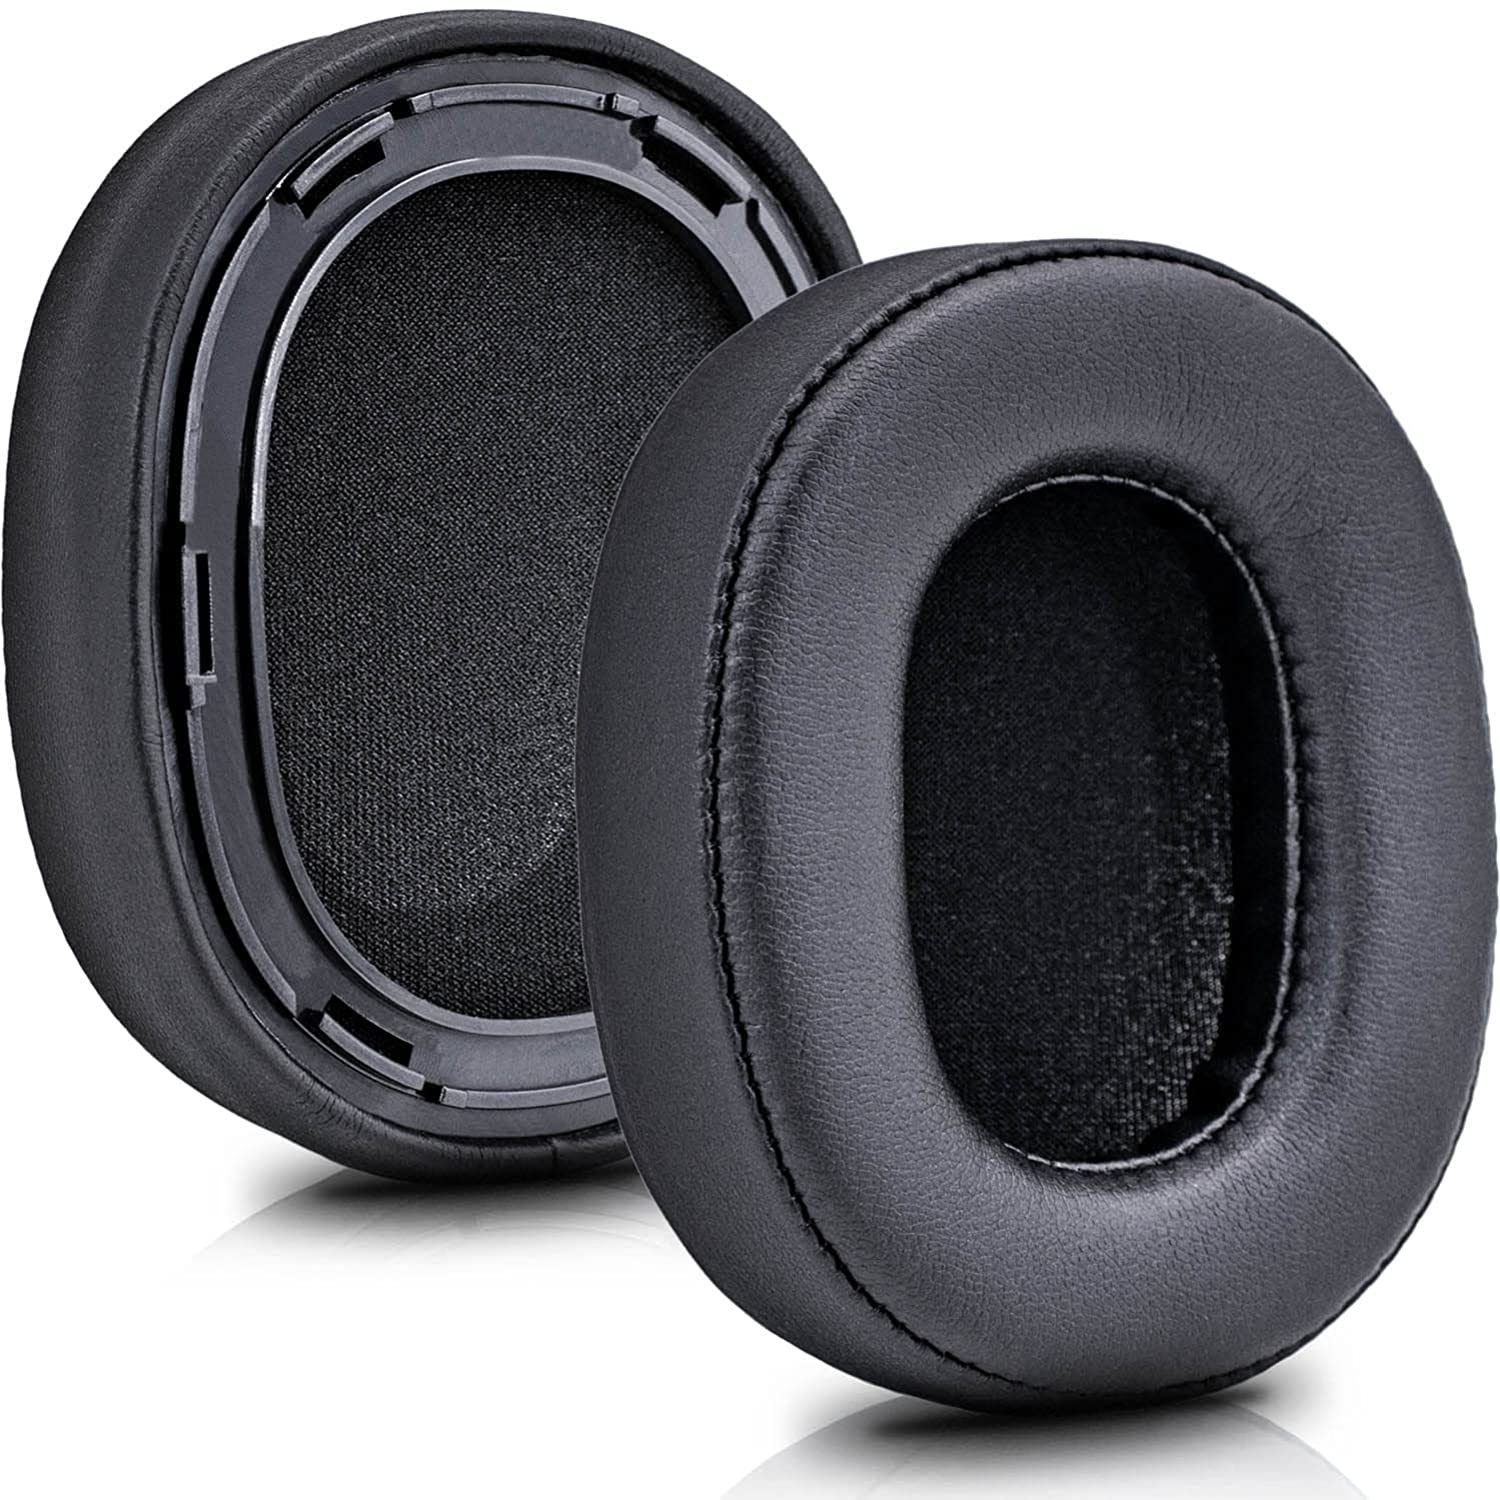 Pm-3 Earpads Compatible With Oppo Pm-3 Pm3 Pm 3 Headphones Replacement Ear Pads/